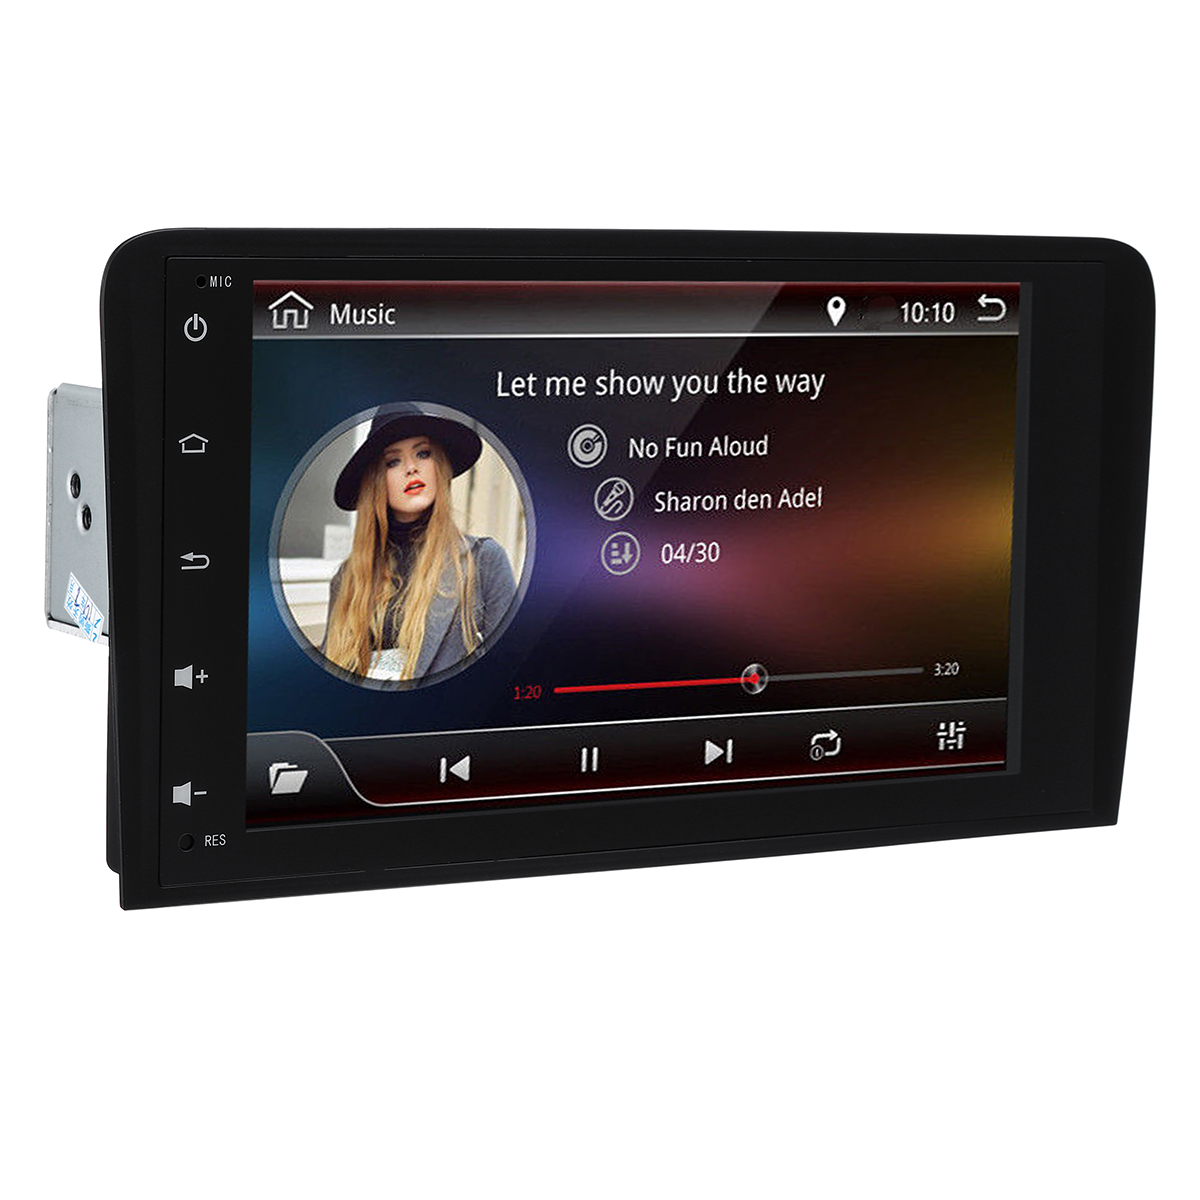 8 Inch 2DIN For Android 8.1 Car Stereo Radio Quad Core 1GB+16GB GPS FM CANBUS WIFI DAB with Backup Camera For Audi A3 8P S3 2003-2012